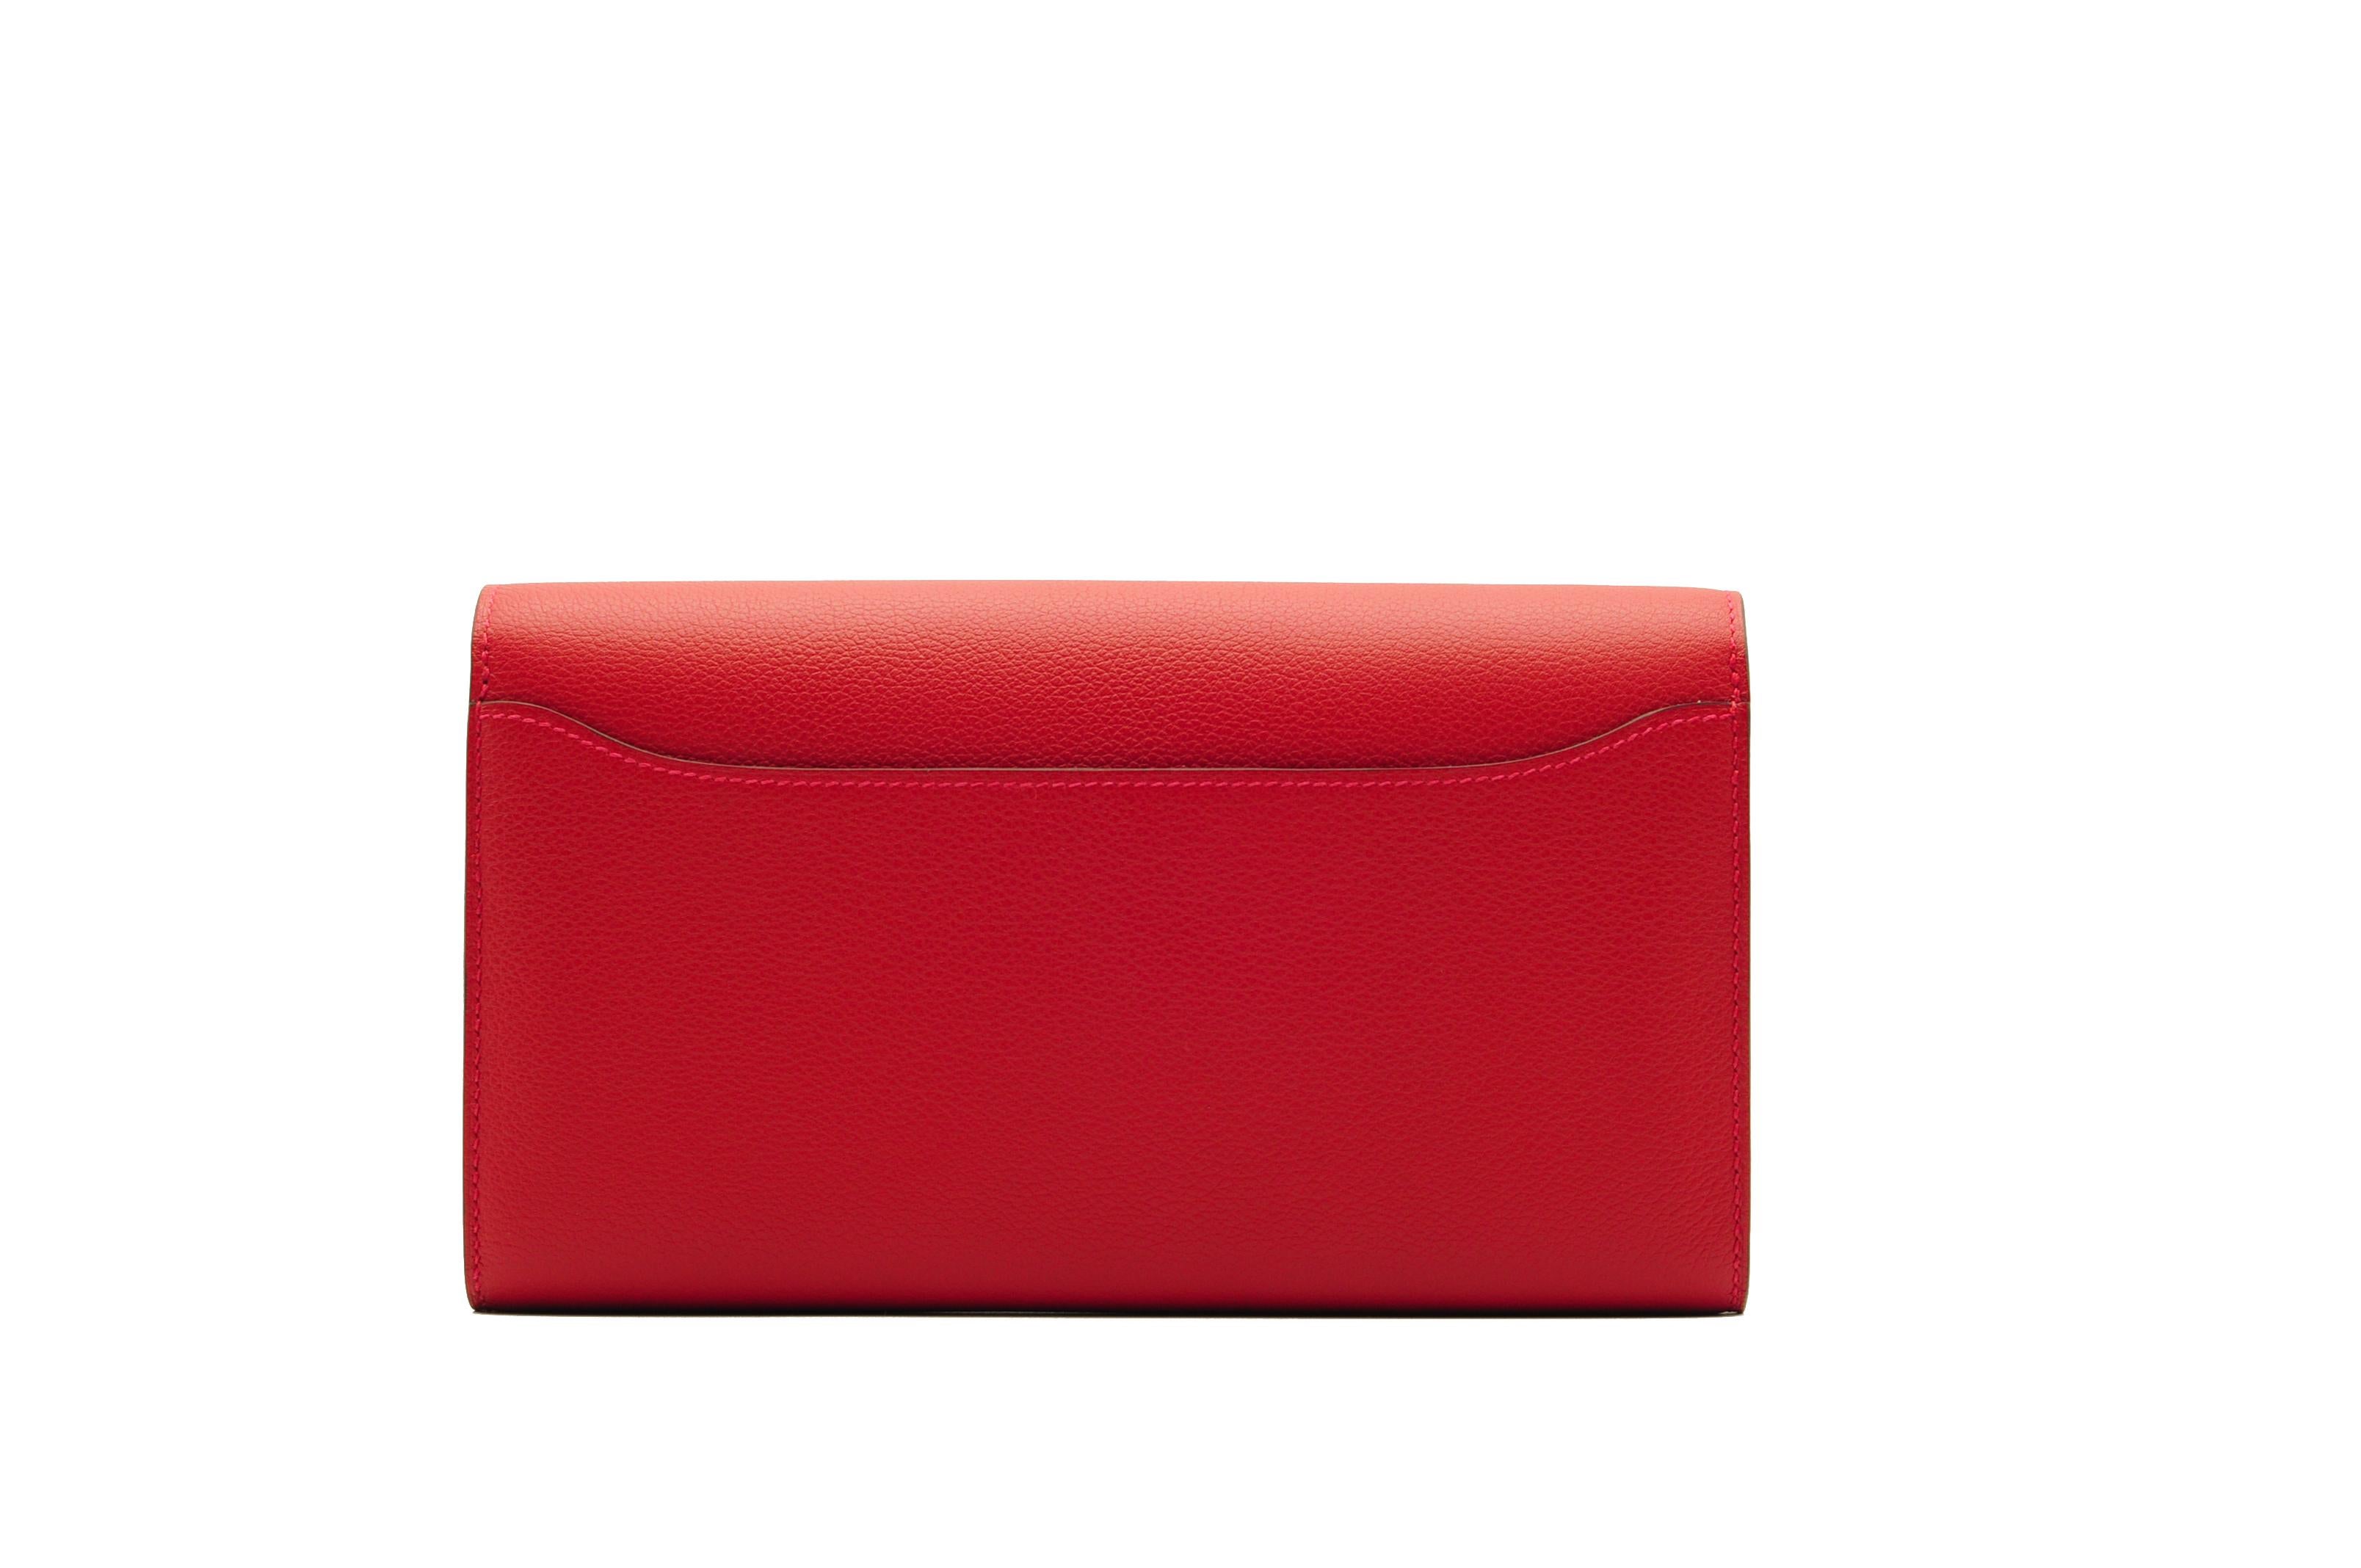 
Brand: Hermès 
Style: Constance Wallet
Size: Long
Color: Rouge Casaque
Leather: Evercolor
Hardware: Gold
Stamp: 2018 C

Condition: Pristine, never carried: The item has never been carried and is in pristine condition complete with all